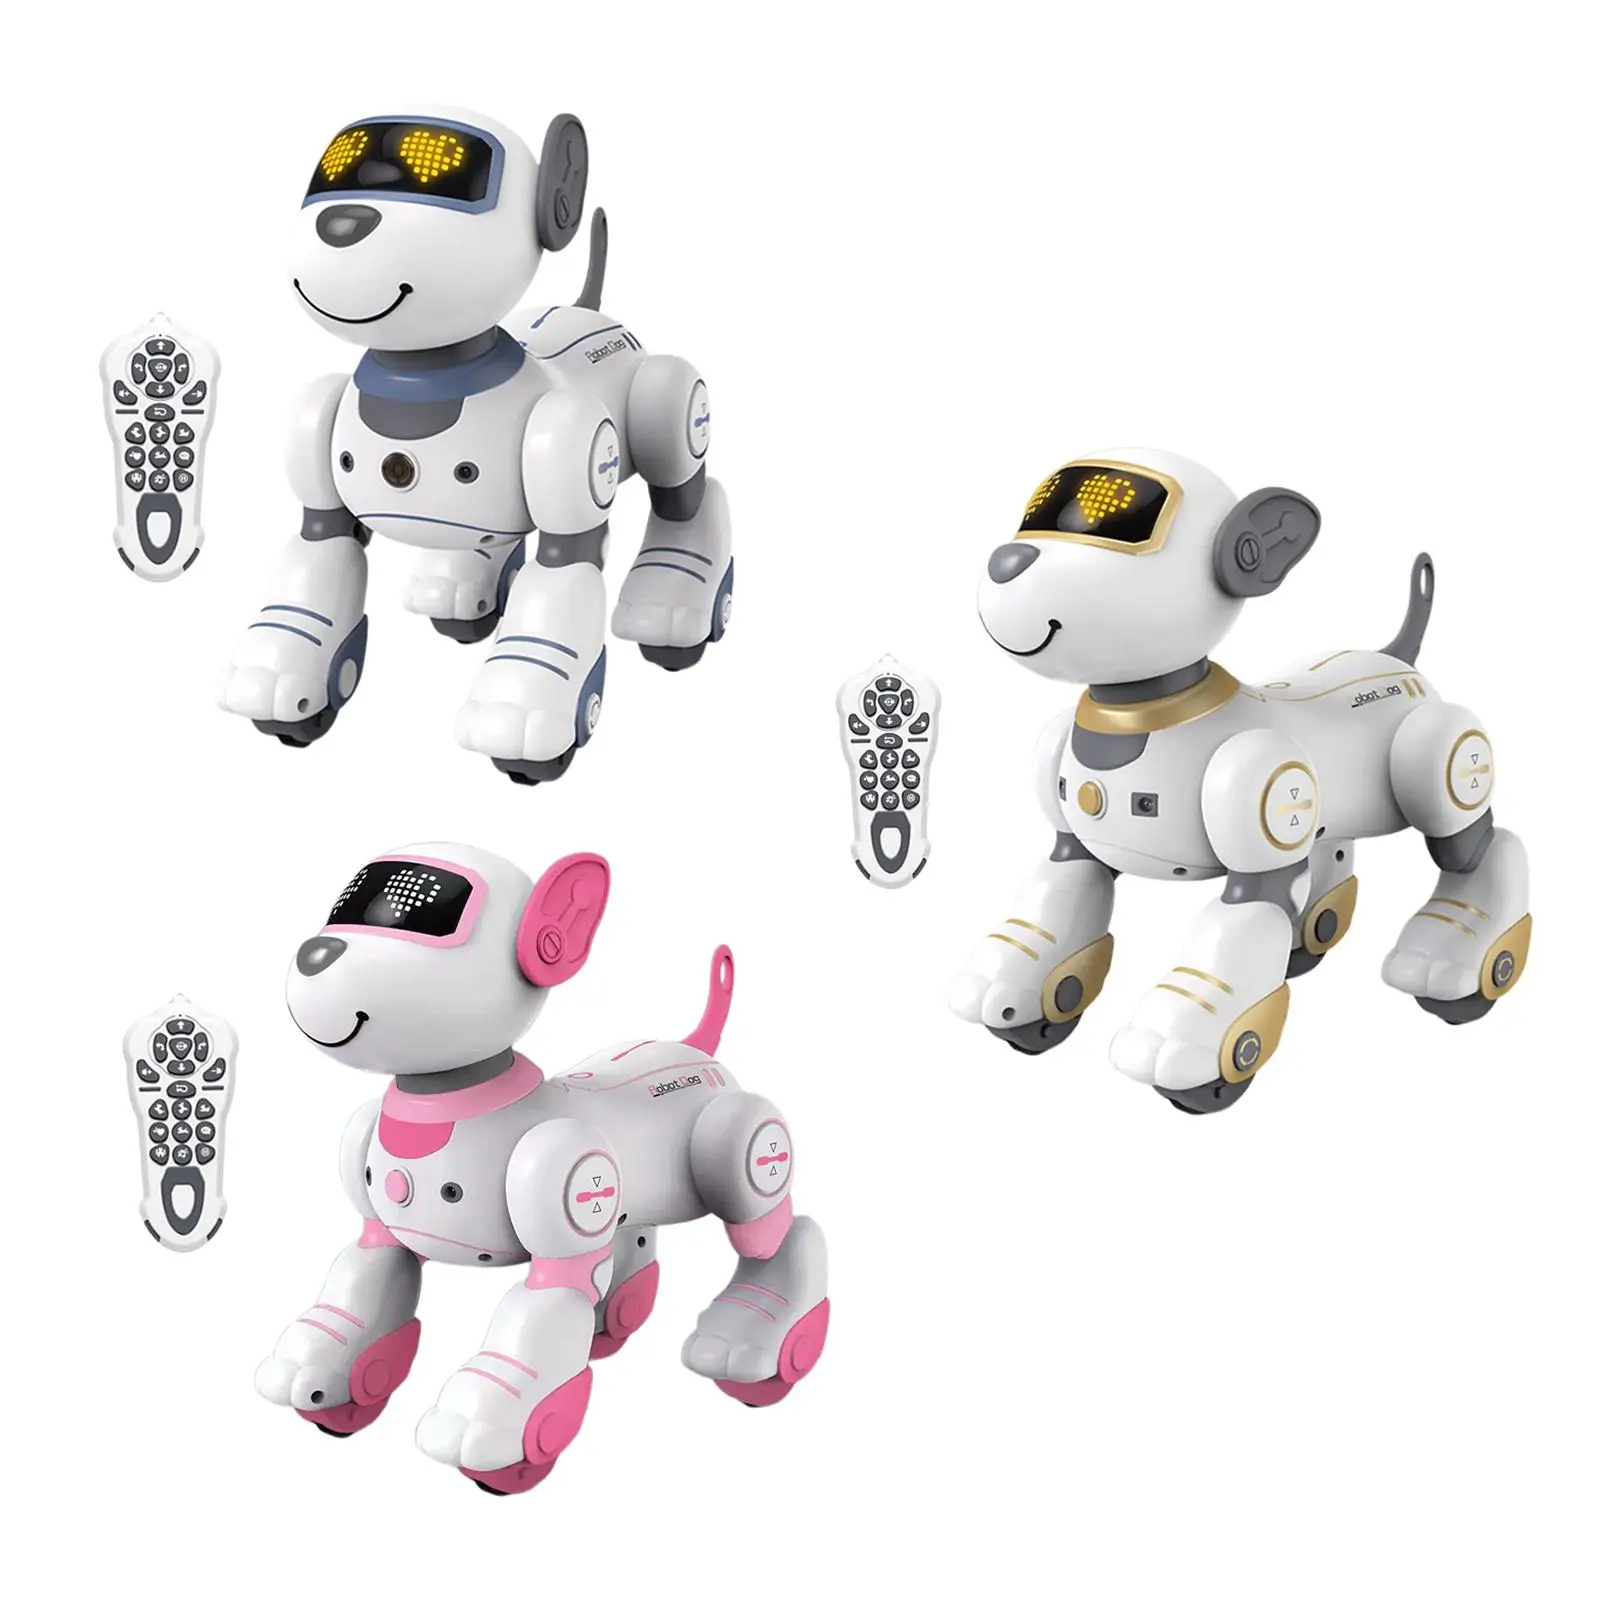 Remote Control Robot Dog Toy Toys Remote Control for Toddlers Baby